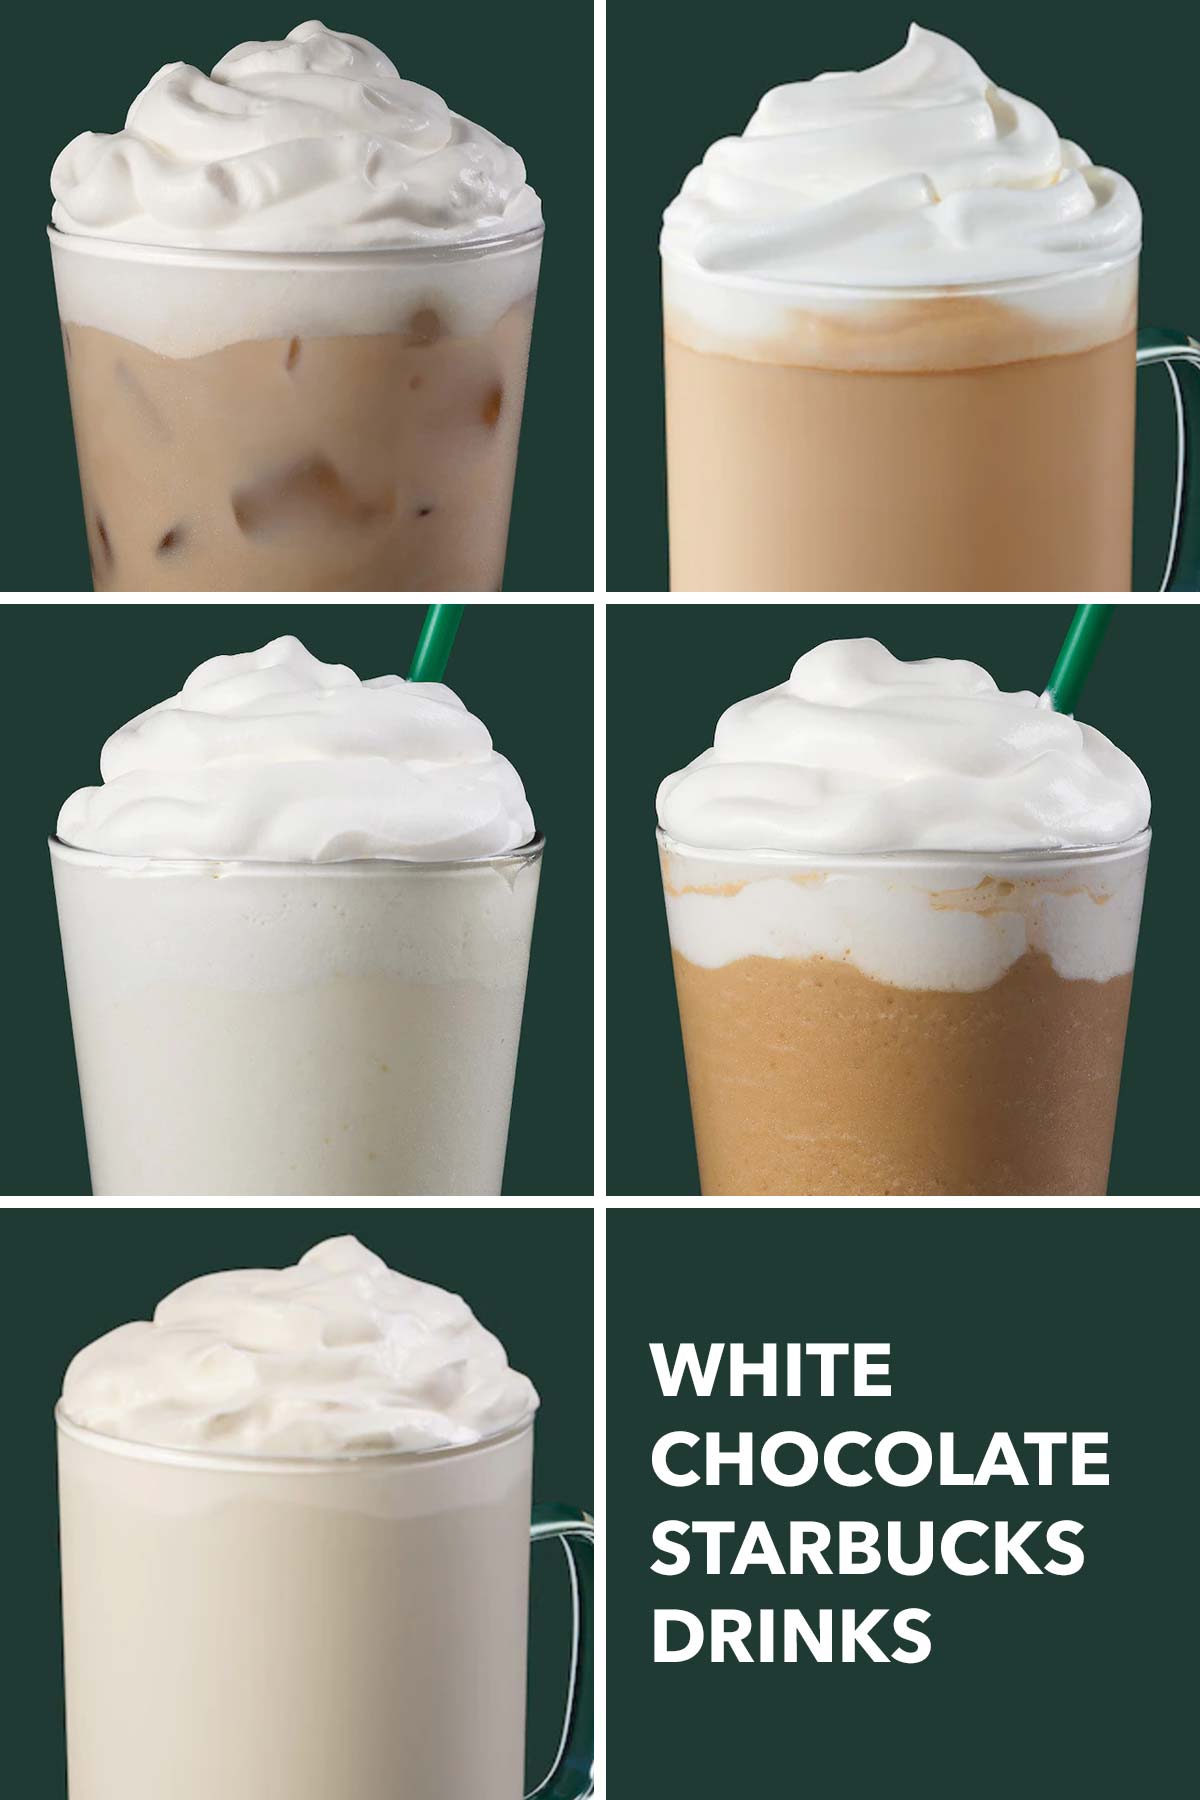 Six photo grid showing five Starbucks drinks with white chocolate.